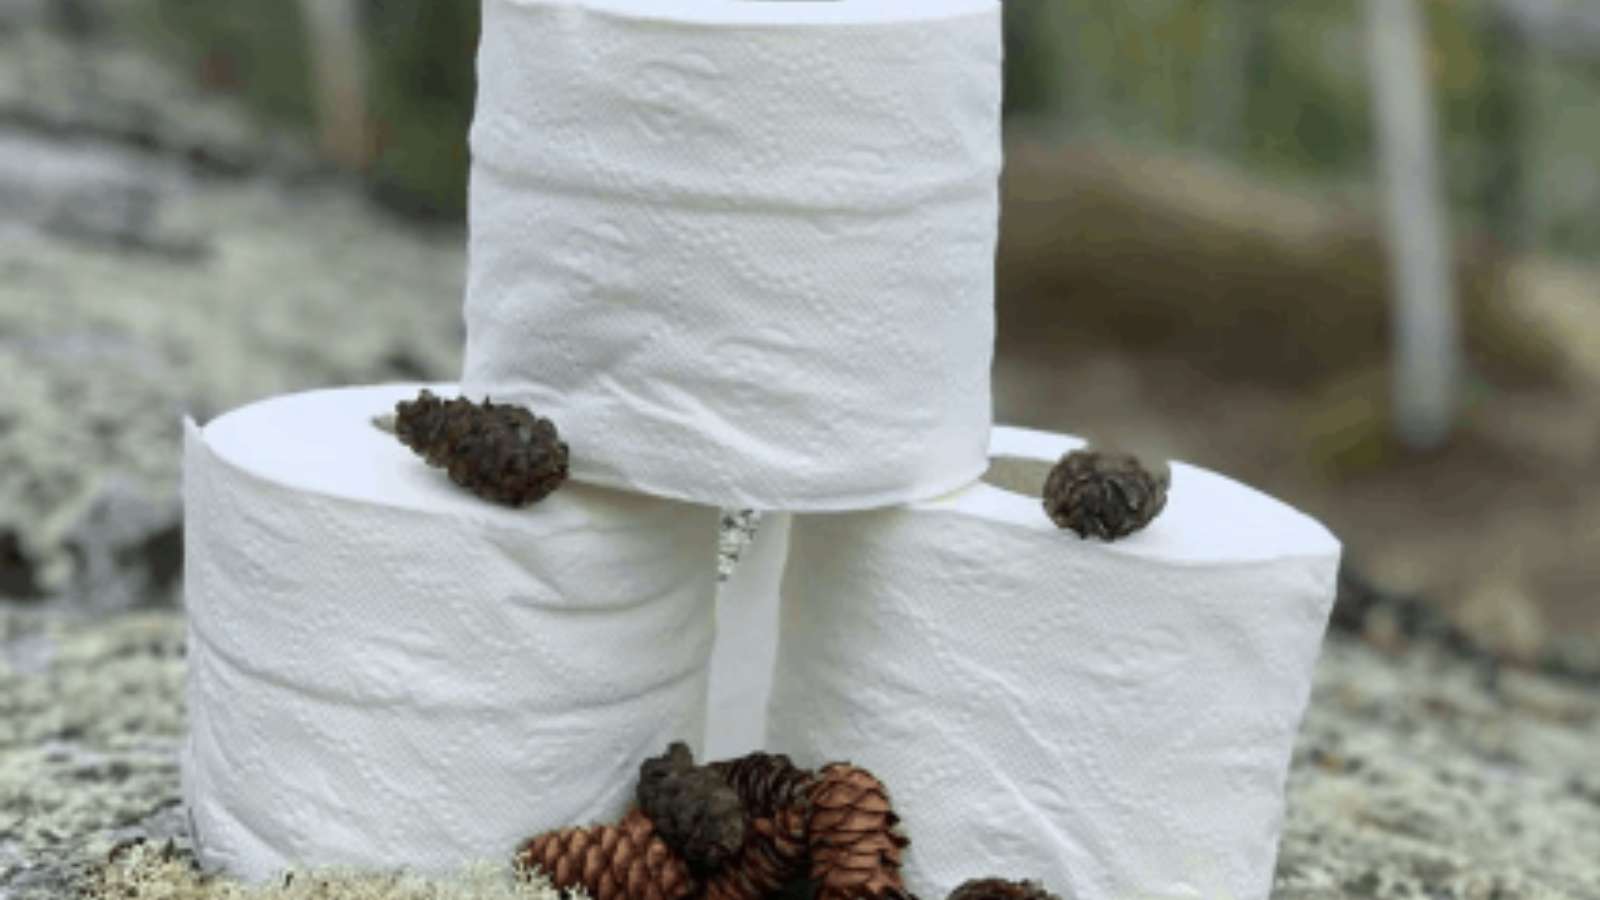 Three rolls of toilet paper stacked on top of pine cones.